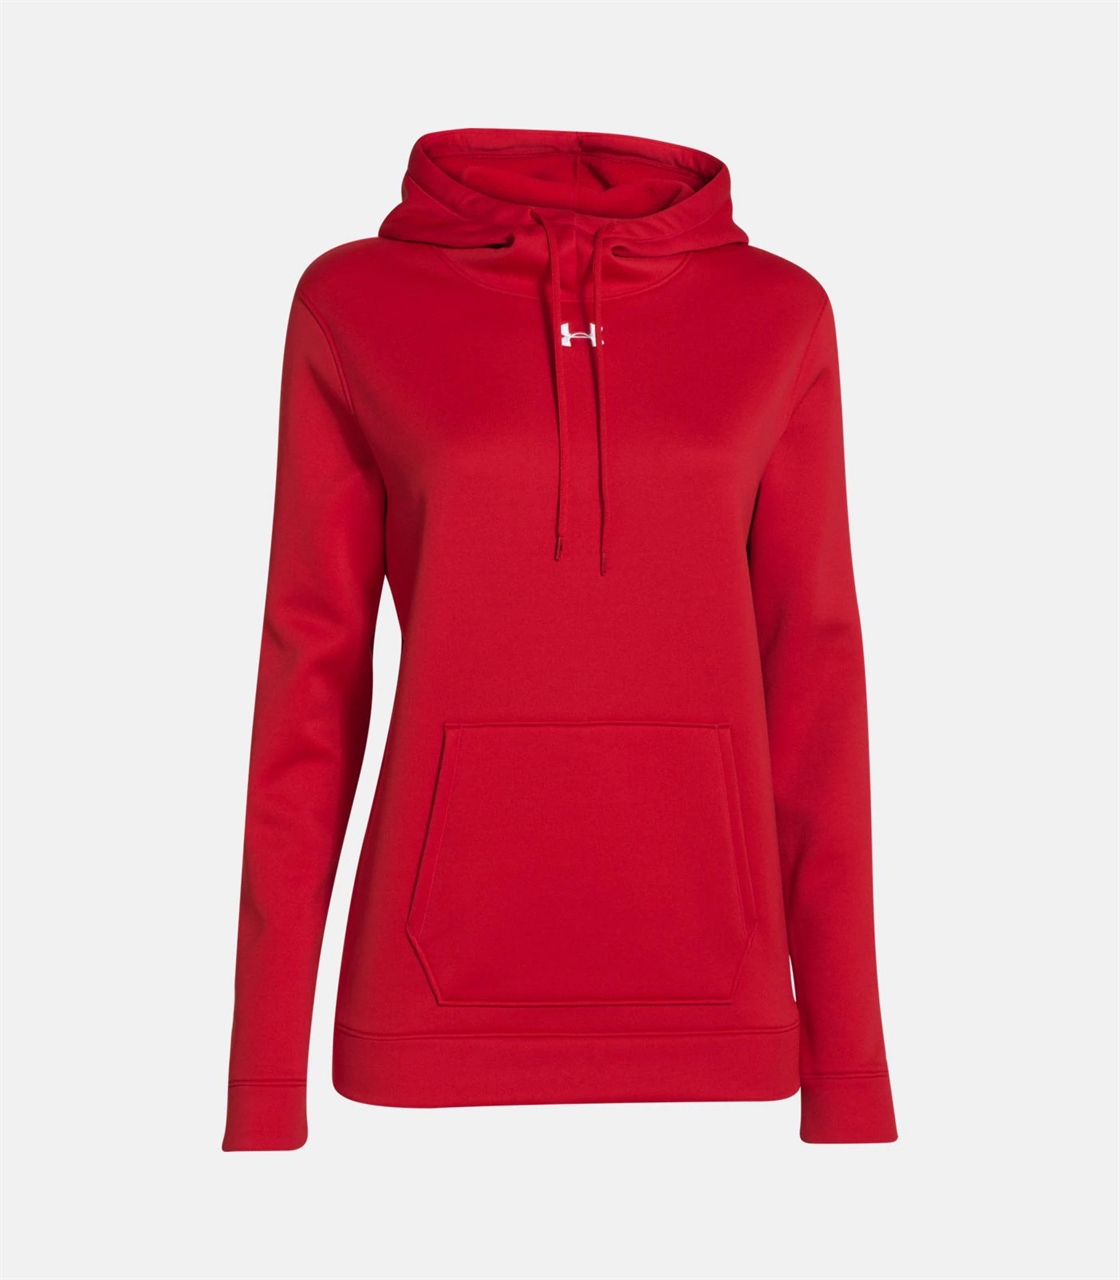 Picture of Under Armour Women's Storm Armour Hoodie